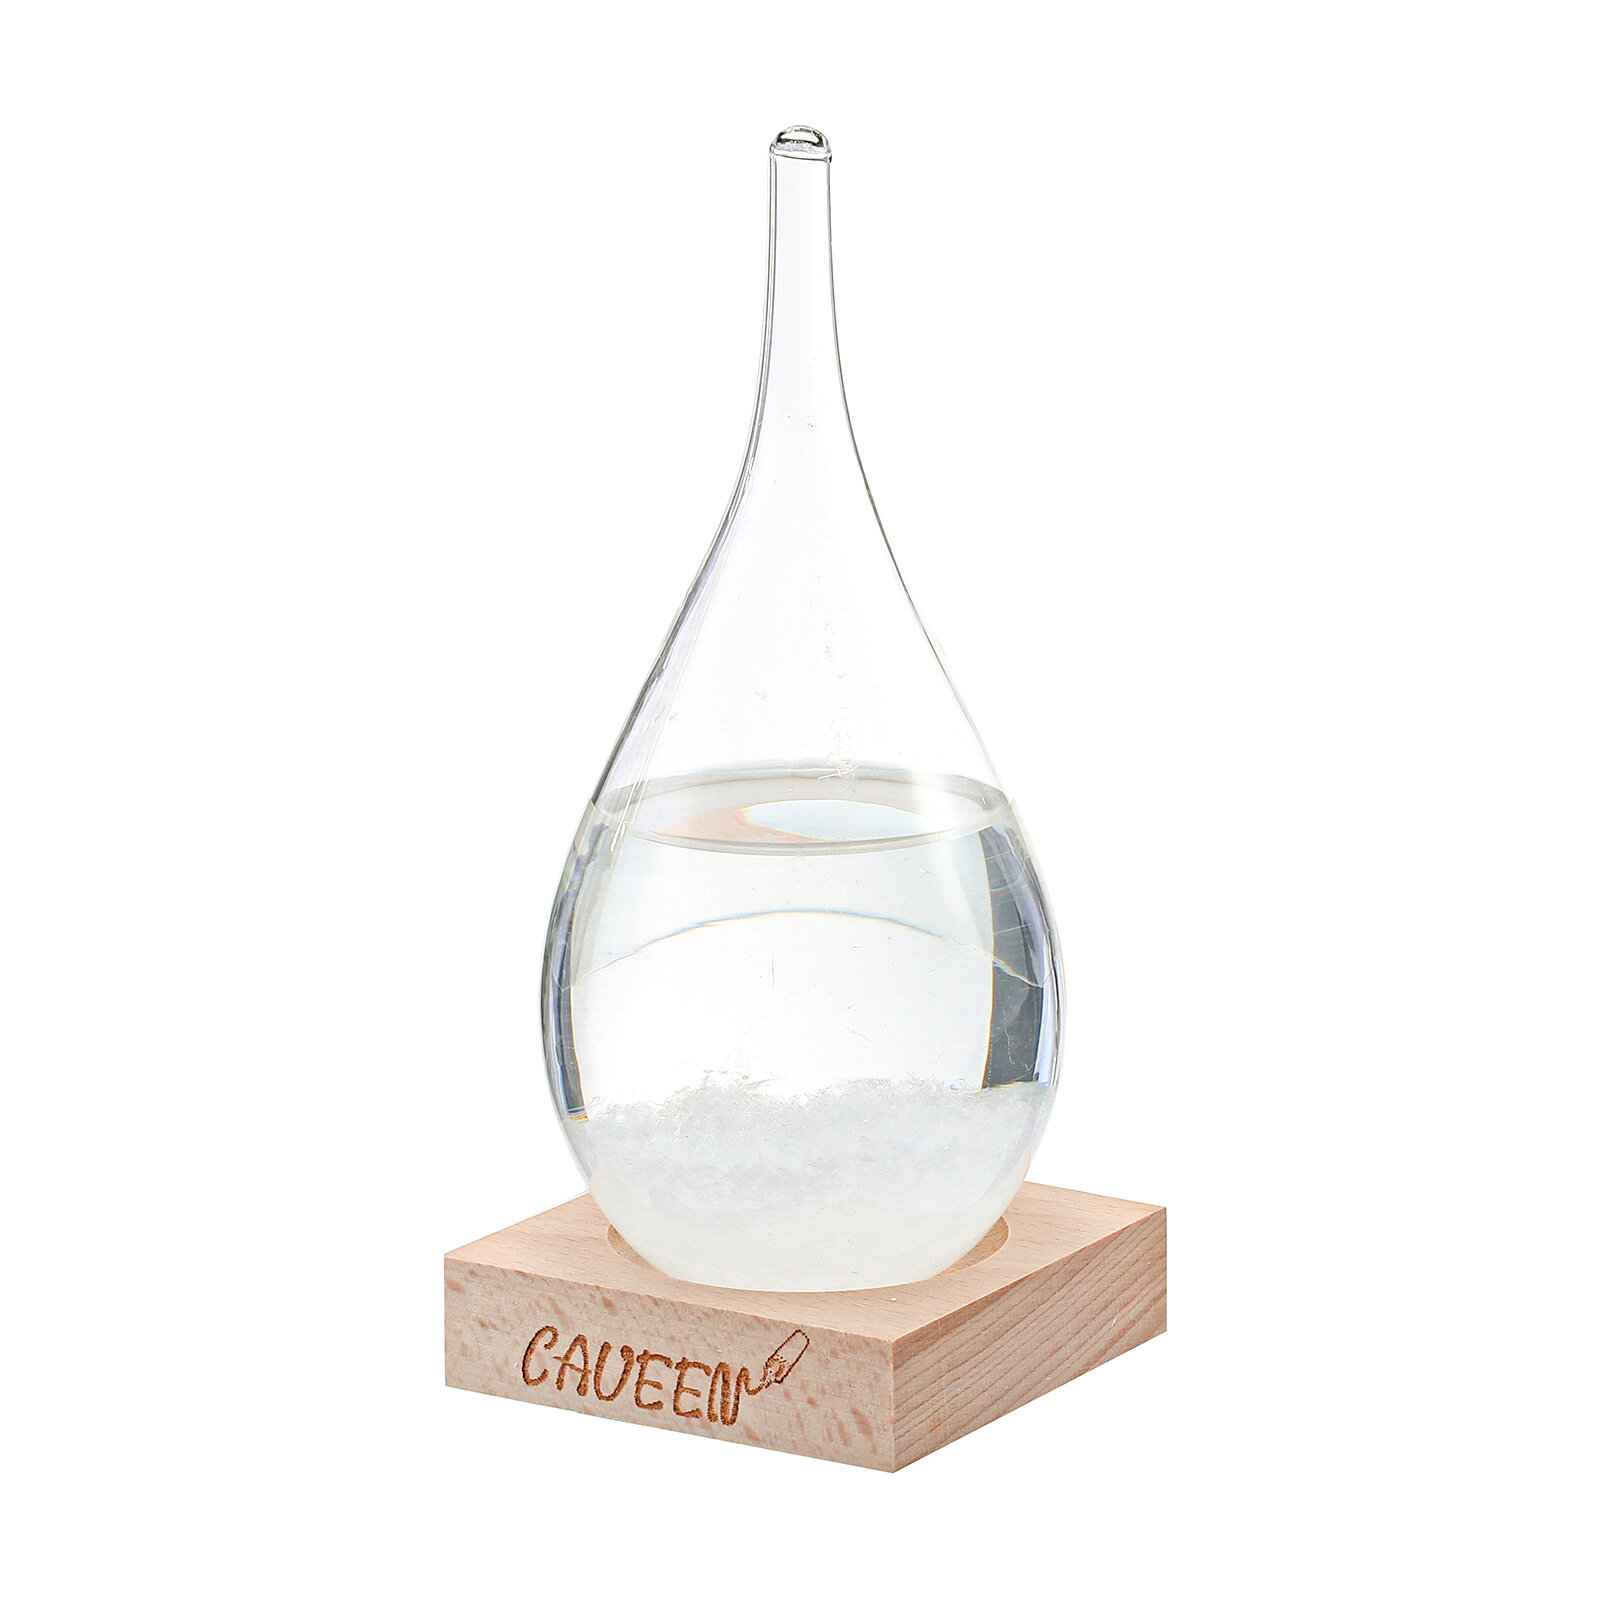 CAVEEN Storm Glass Weather Forecaster Stylish and Creative Drop-Shaped Glass Barometer Weather Stati